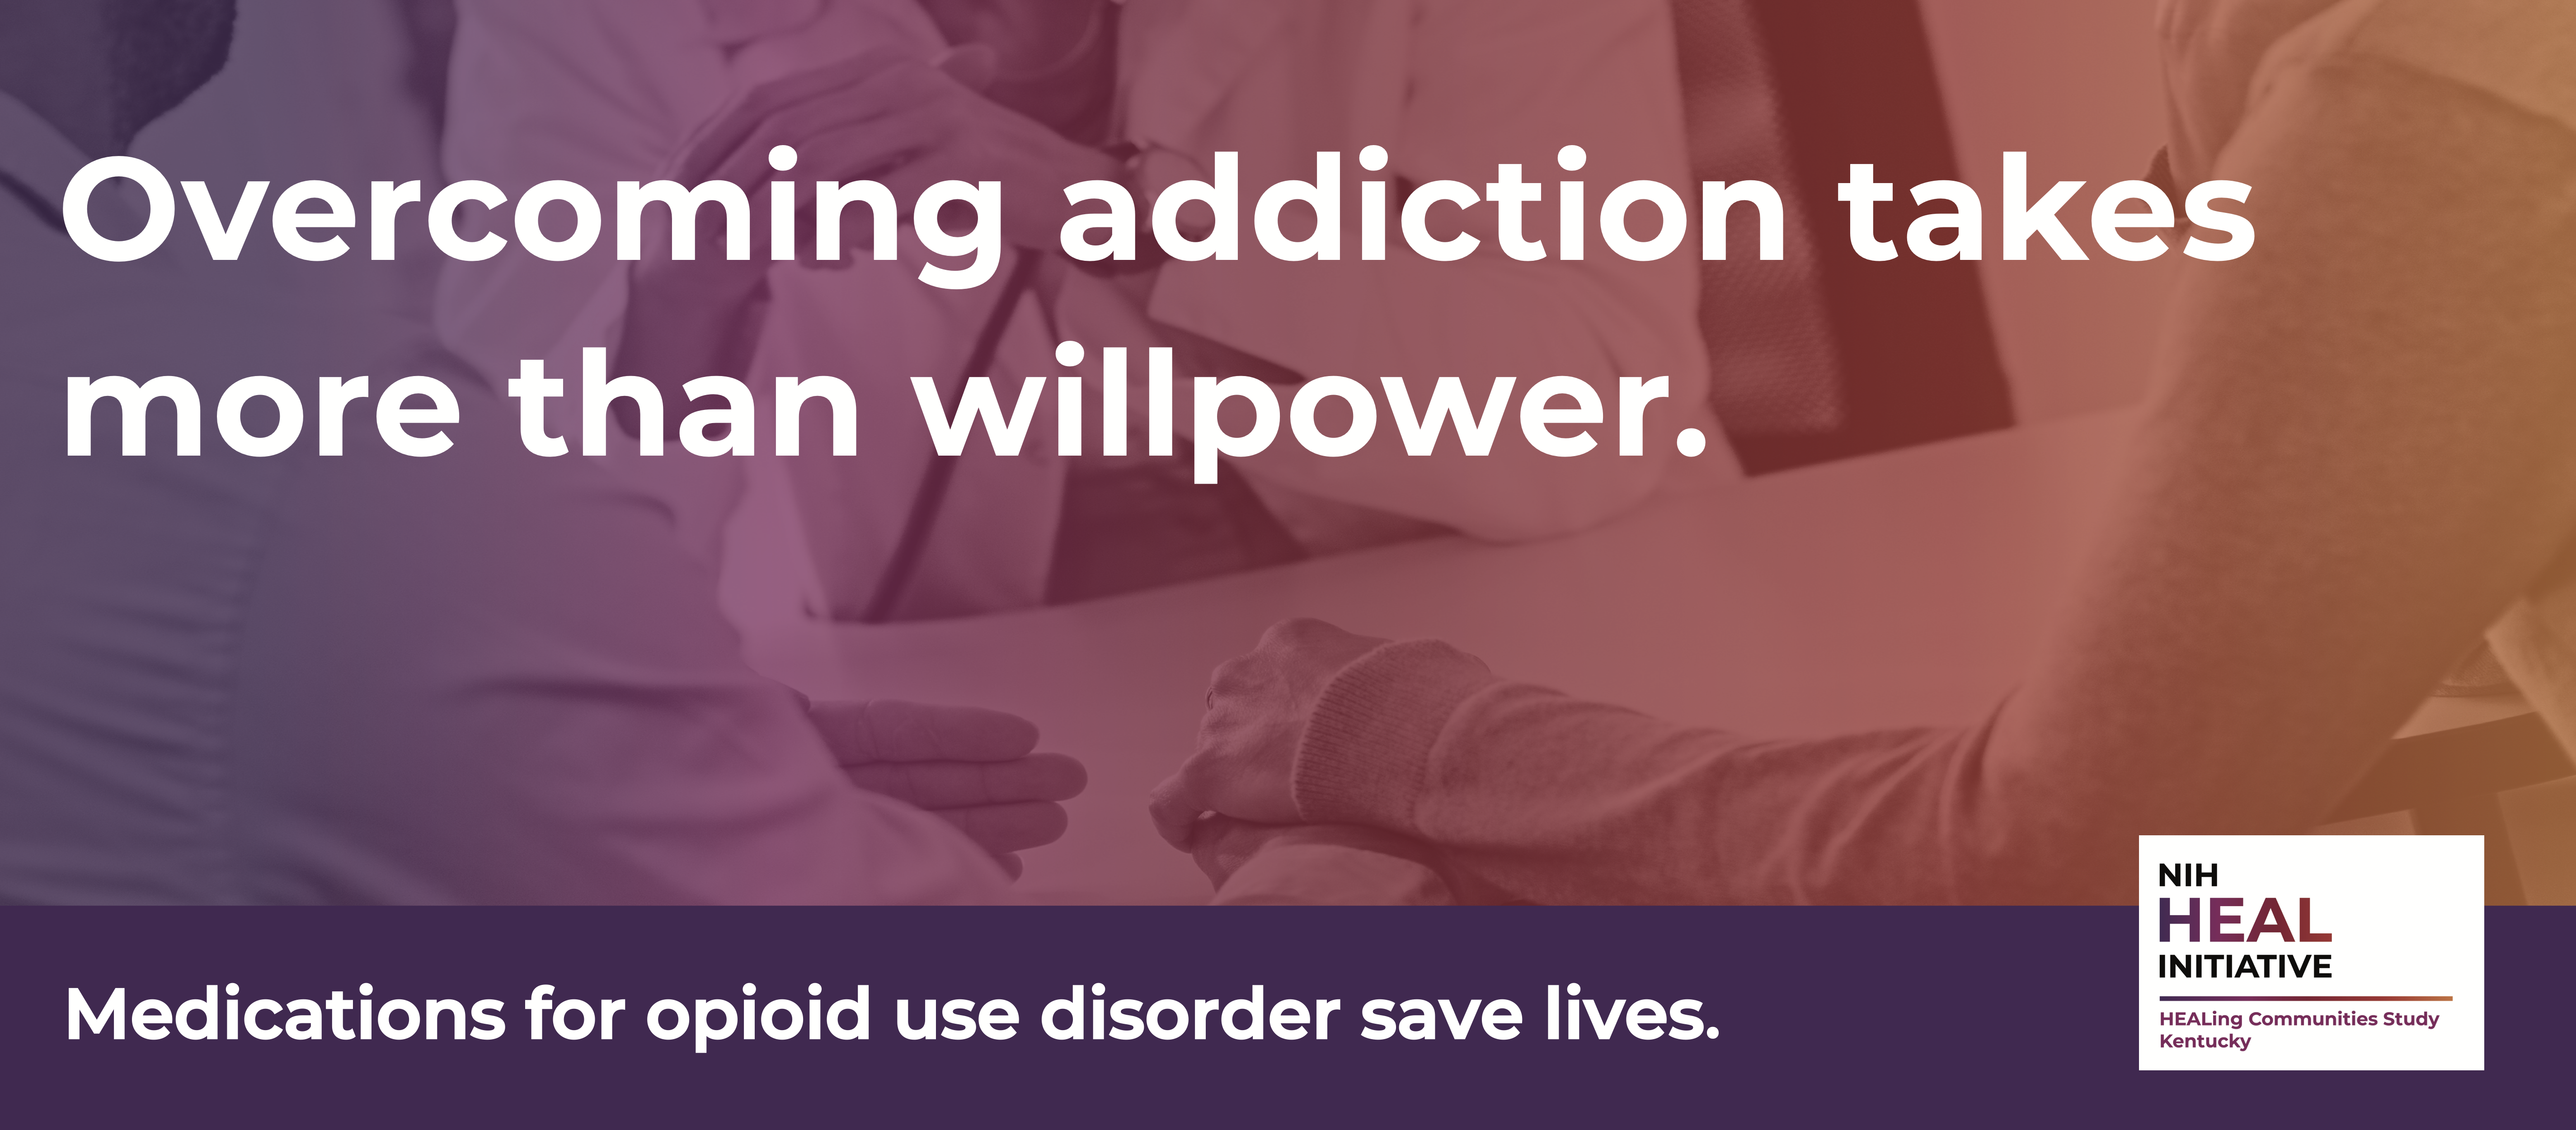 Overcoming addiction takes more than willpower. Medications for opioid use disorder save lives.